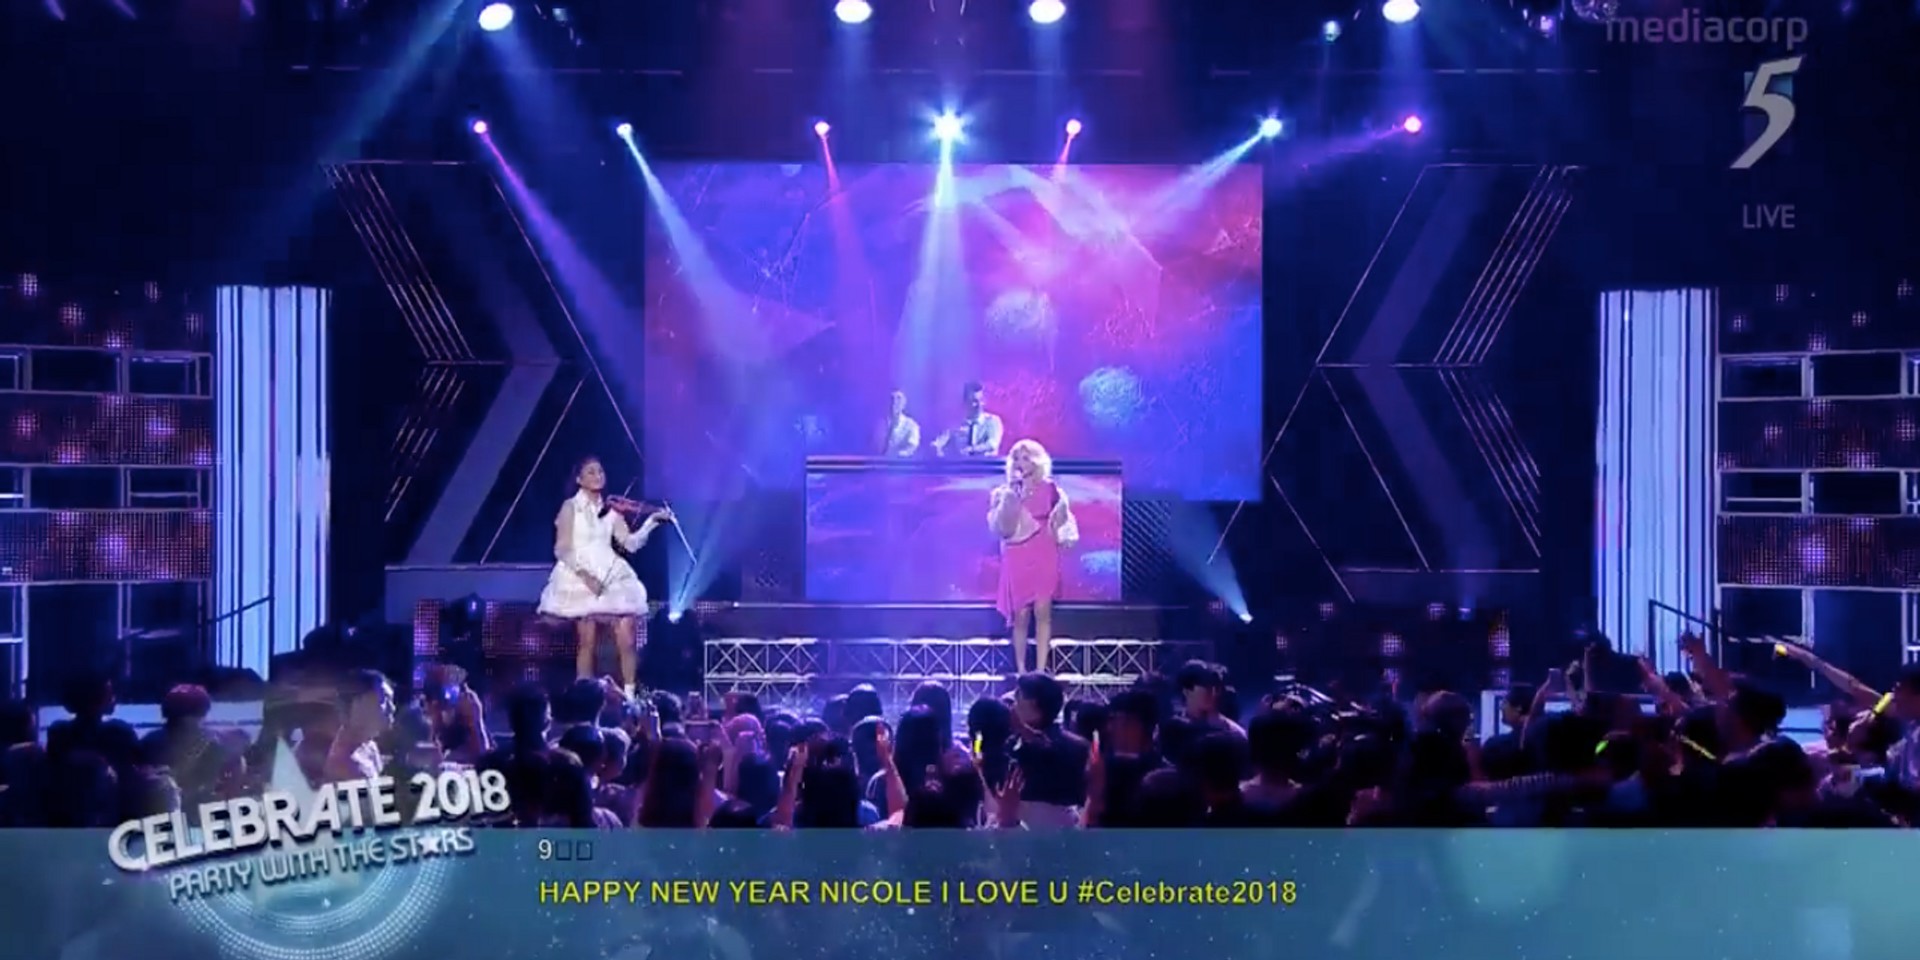 Watch performances from the Channel 5 2018 countdown, featuring The Sam Willows, Aisyah Aziz and more